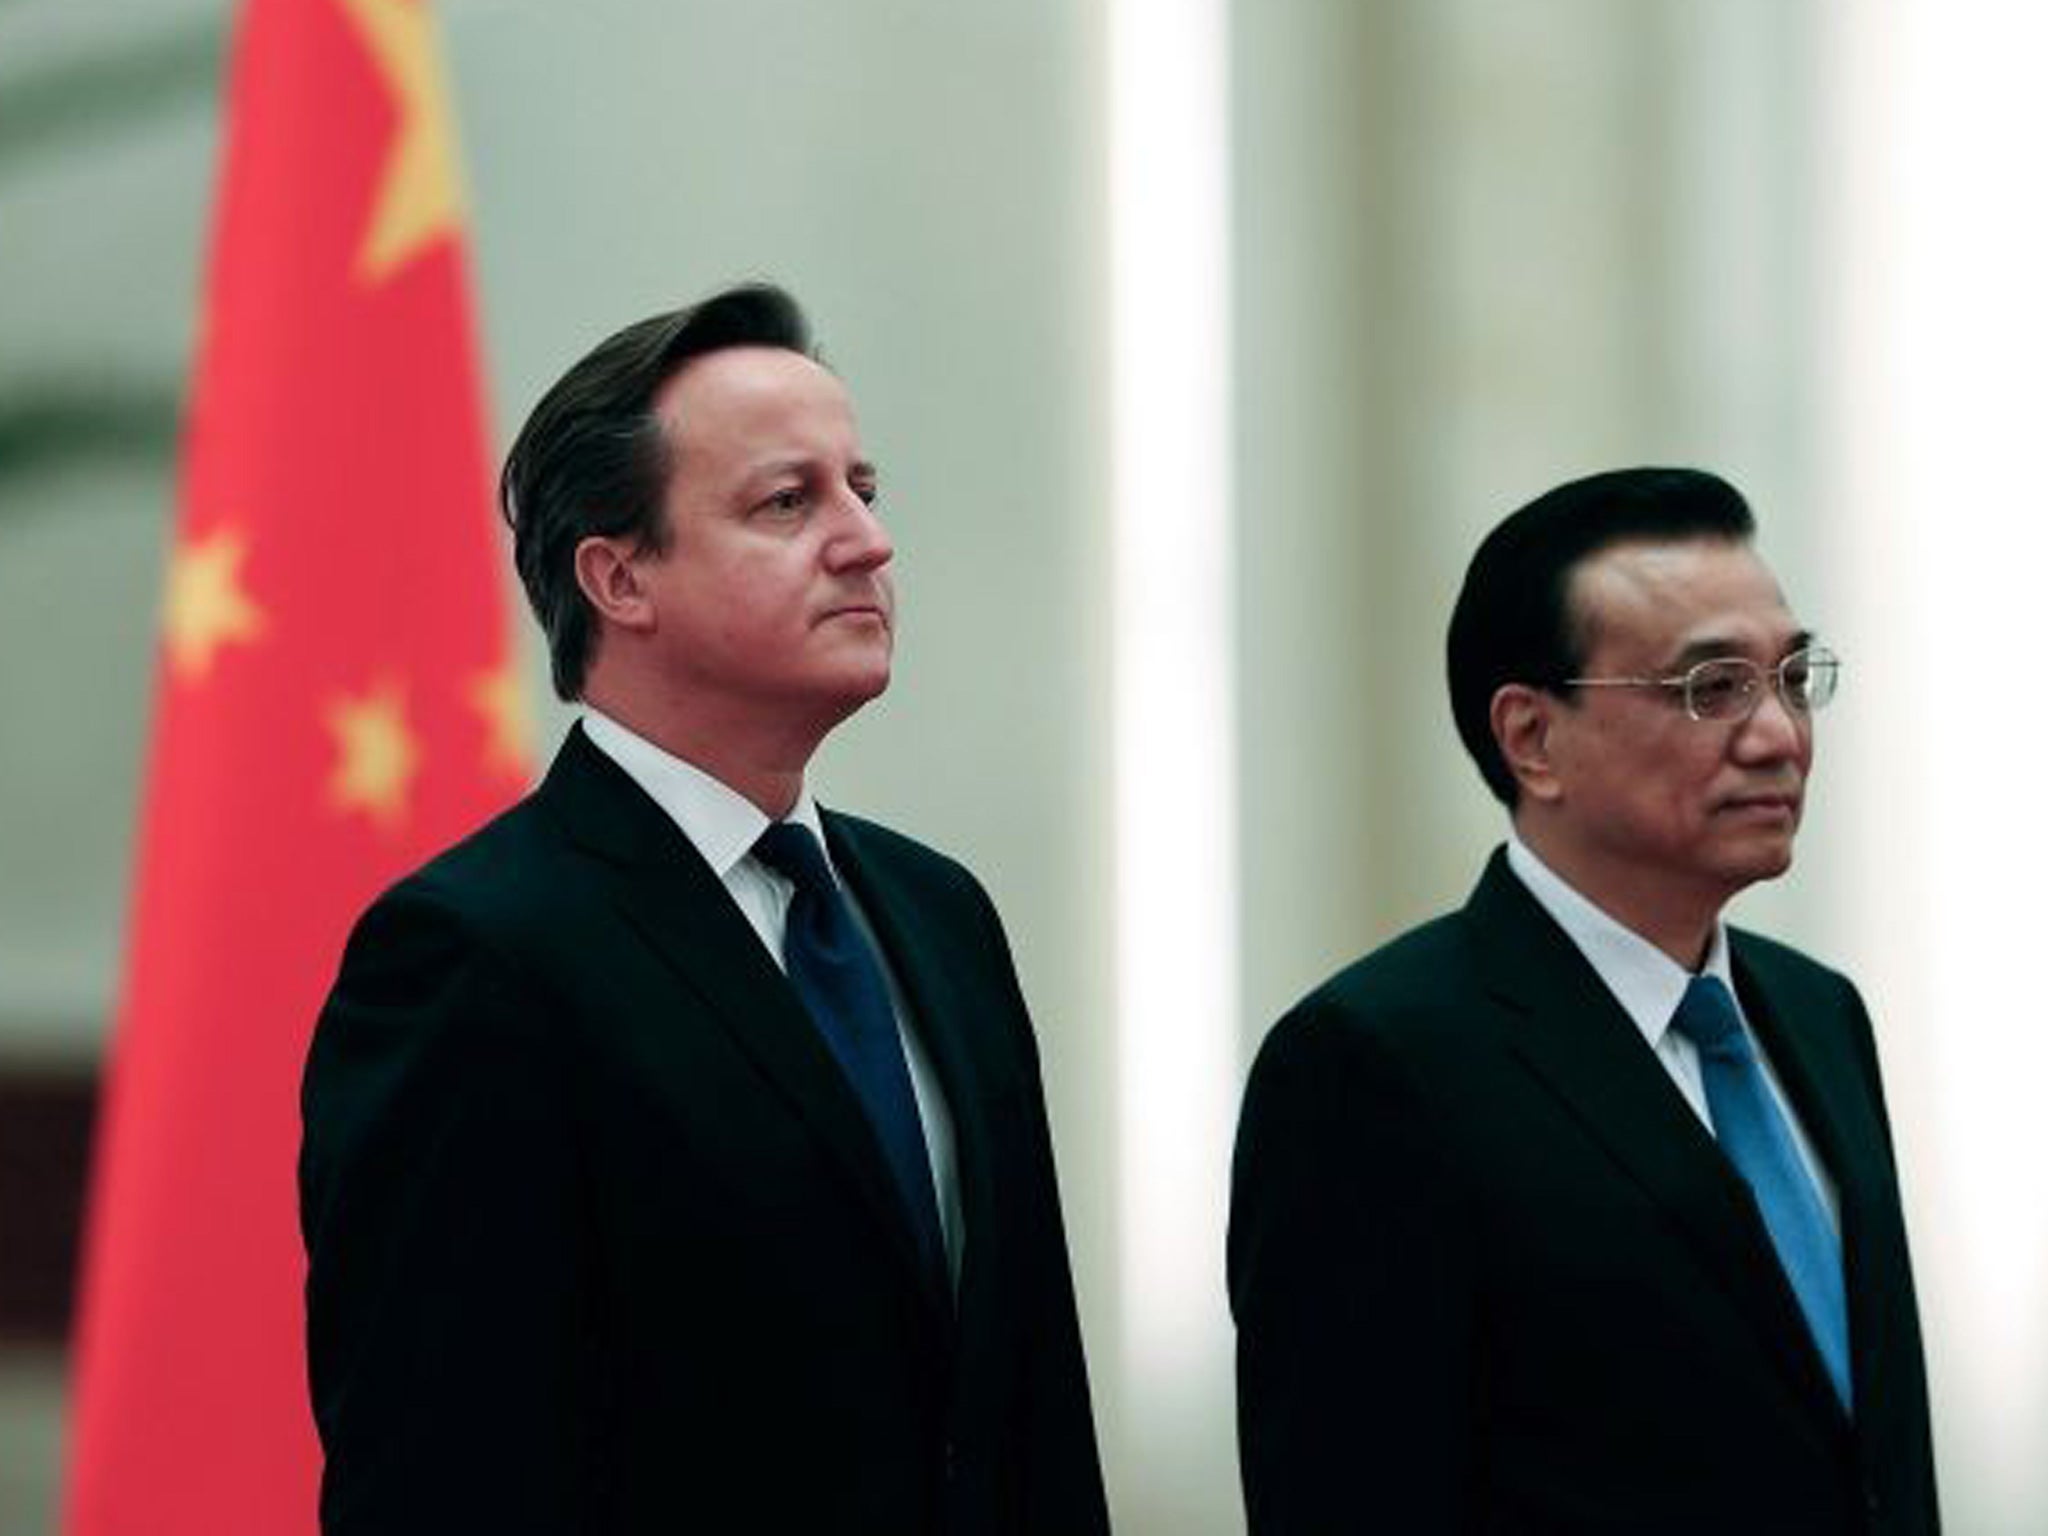 Chinese Premier Li Keqiang (right) and David Cameron (L) view an honour guard during a welcoming ceremony inside the Great Hall of the People in Beijing, China